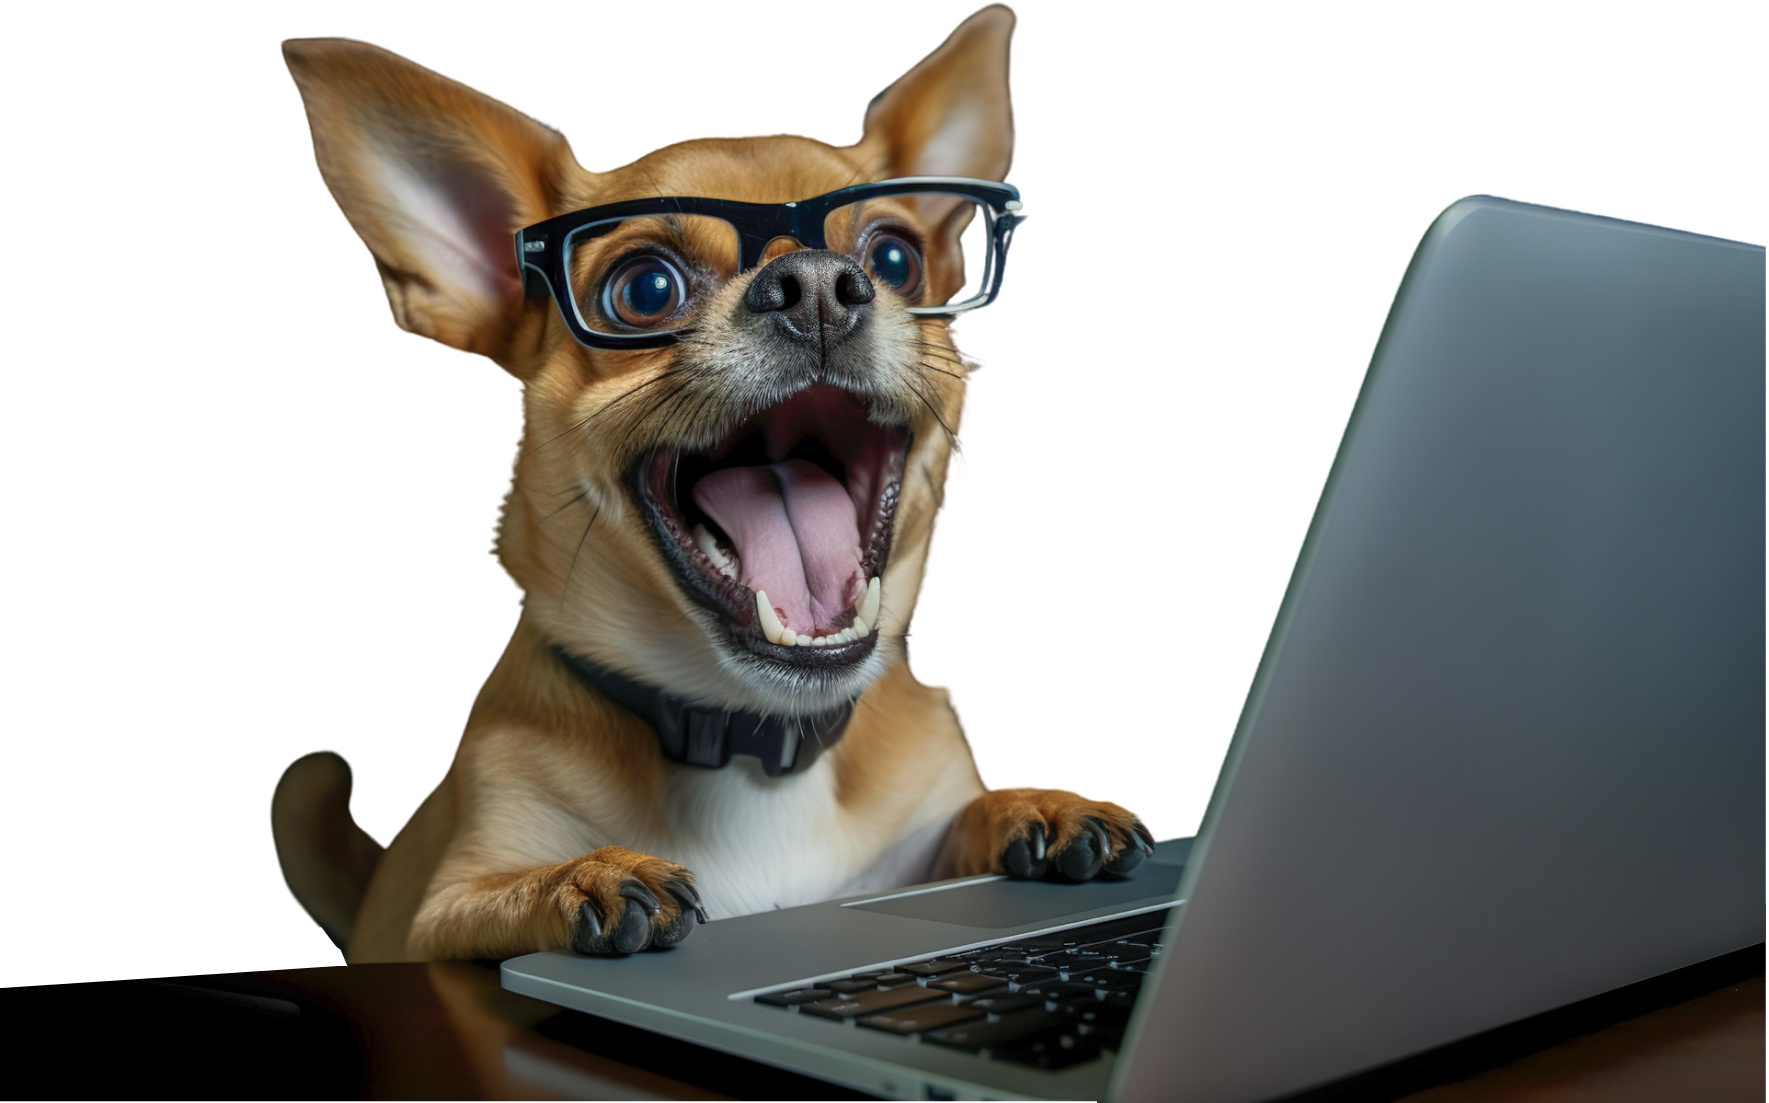 Dog on a computer smiling